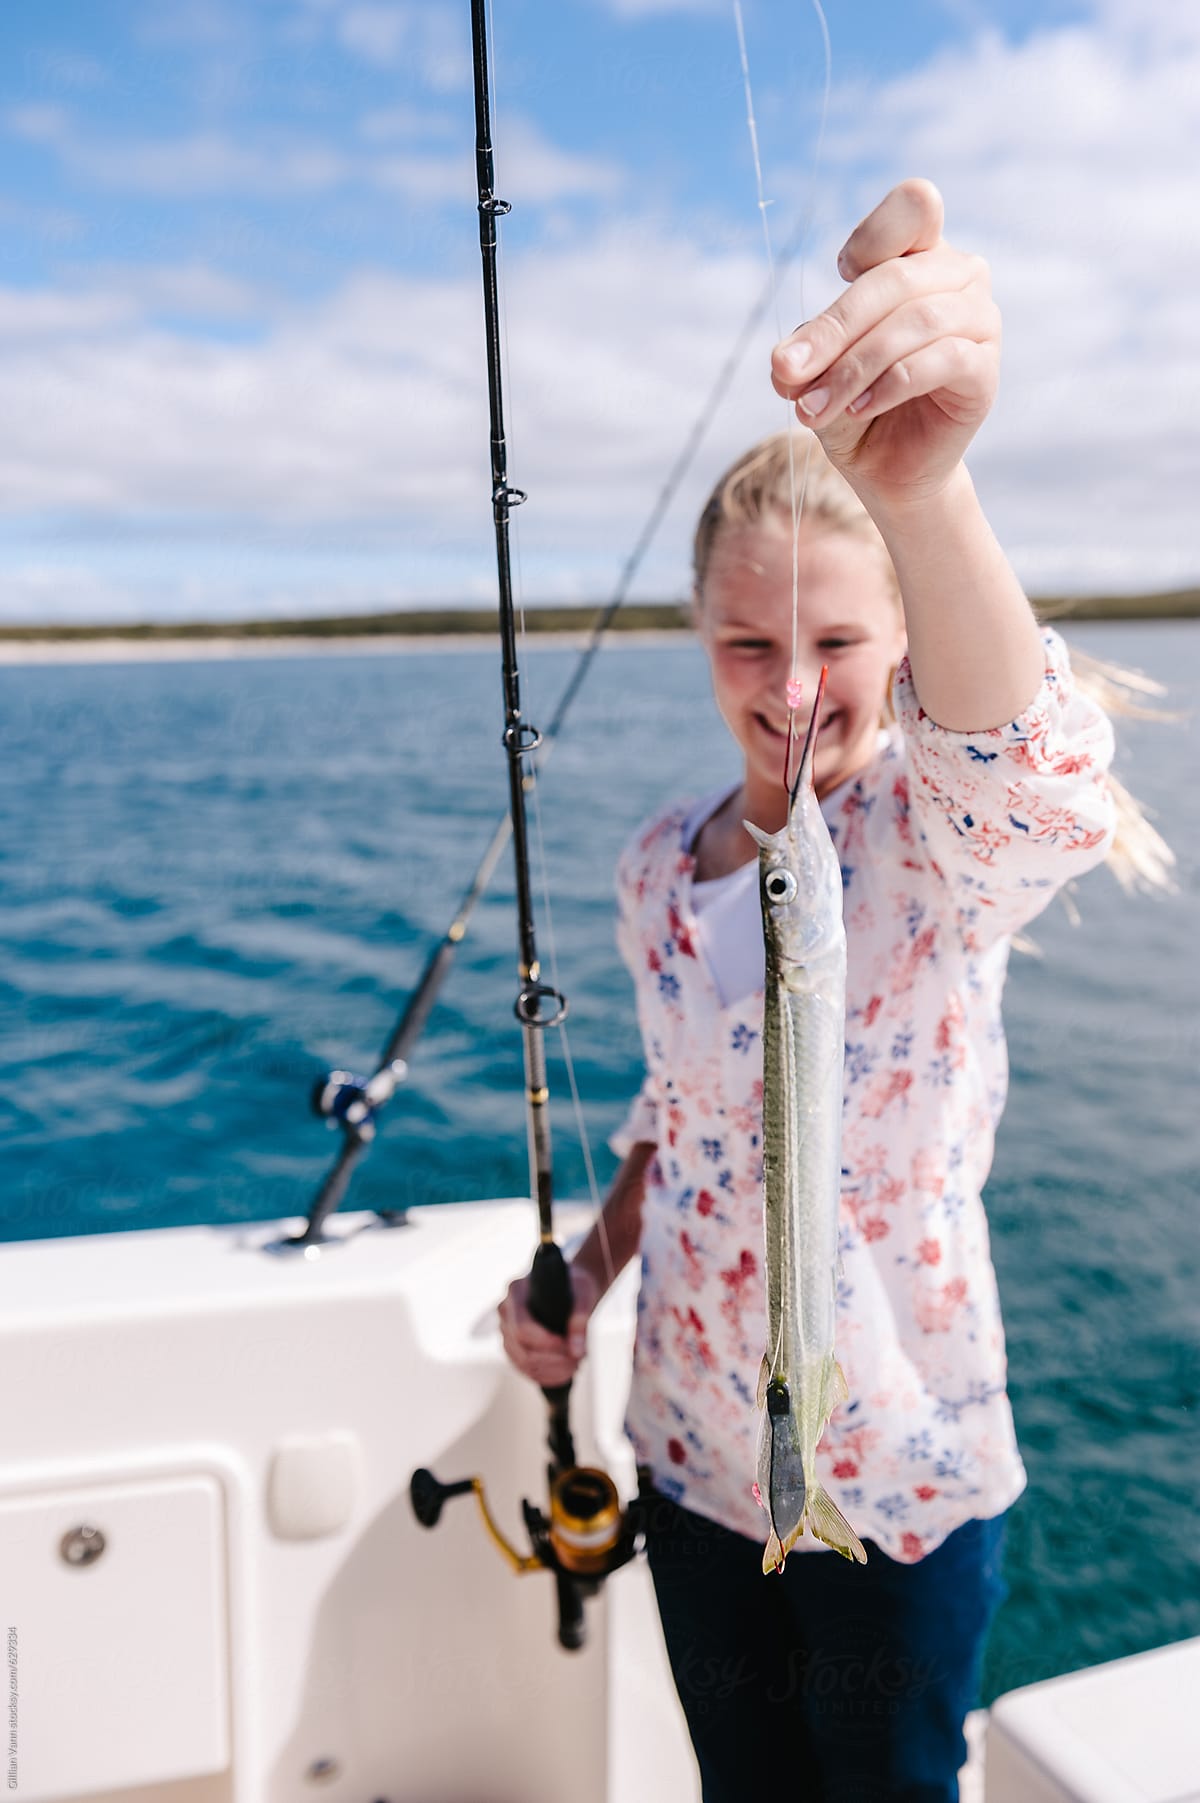 Teenager Catching A Fish by Stocksy Contributor Gillian Vann - Stocksy